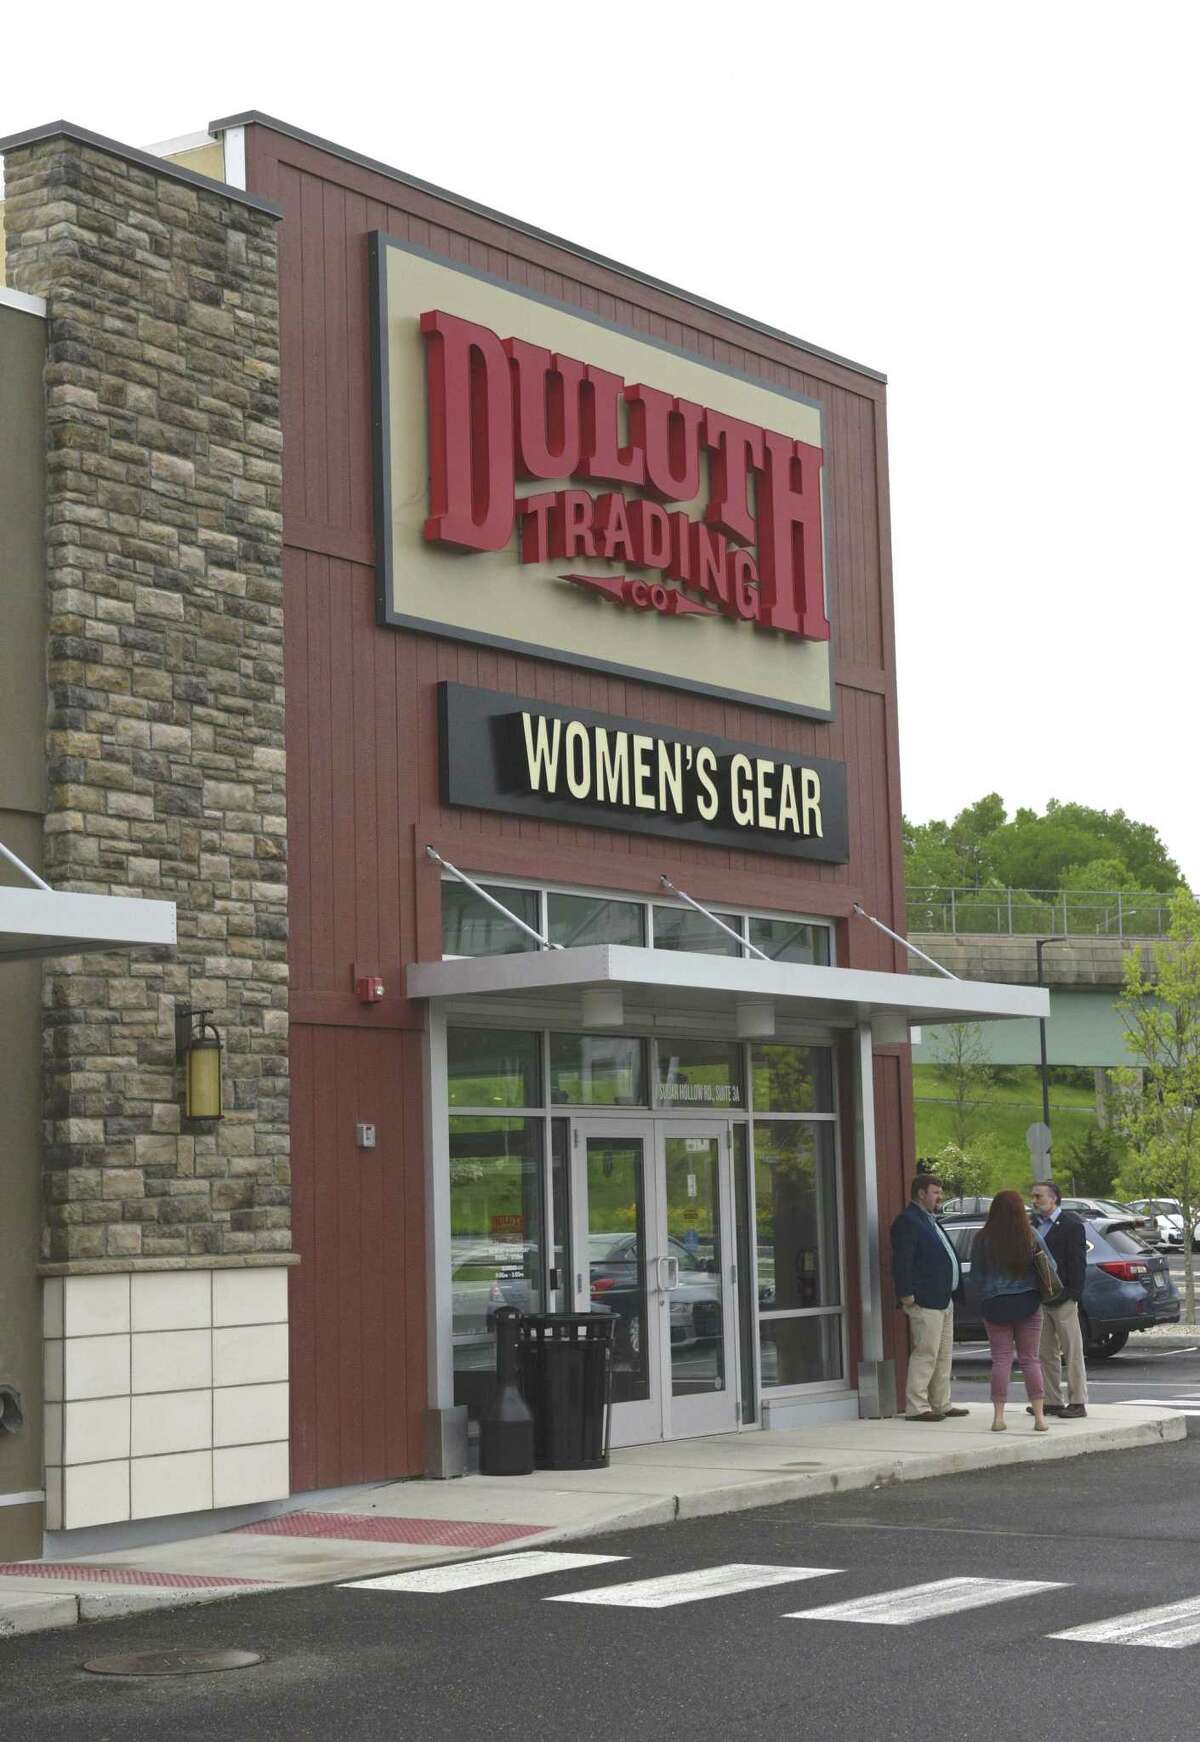 Grand opening of the new Duluth Trading Co store in the Shops at Marcus Dairy shopping center, Danbury, Conn, Thursday, May 23, 2019.